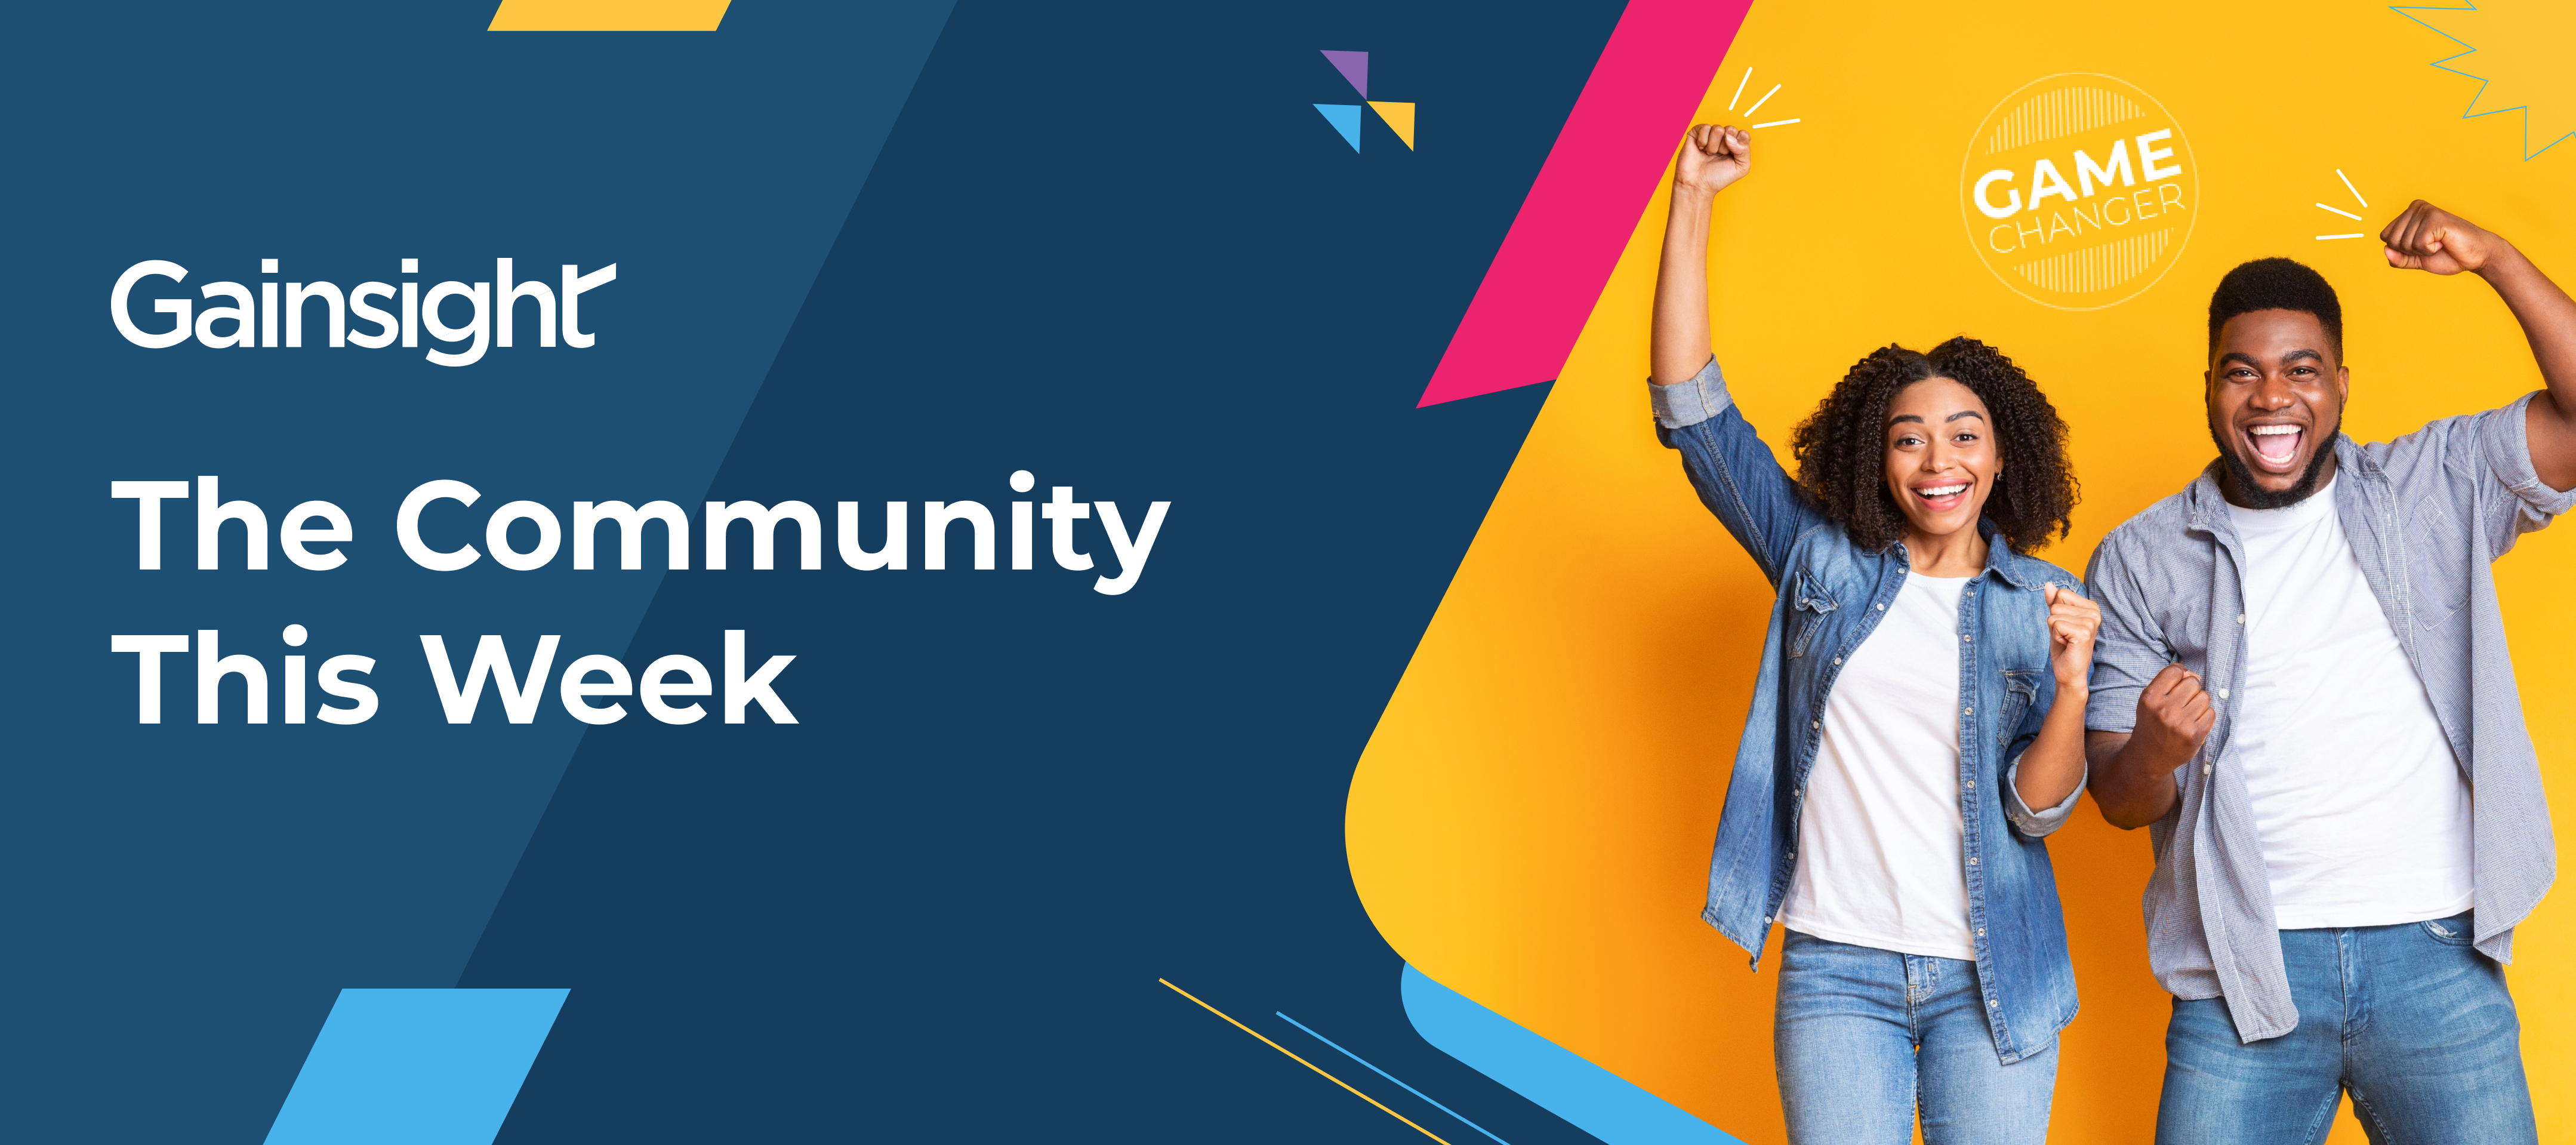 The Community This Week: One GameChanger profile for life